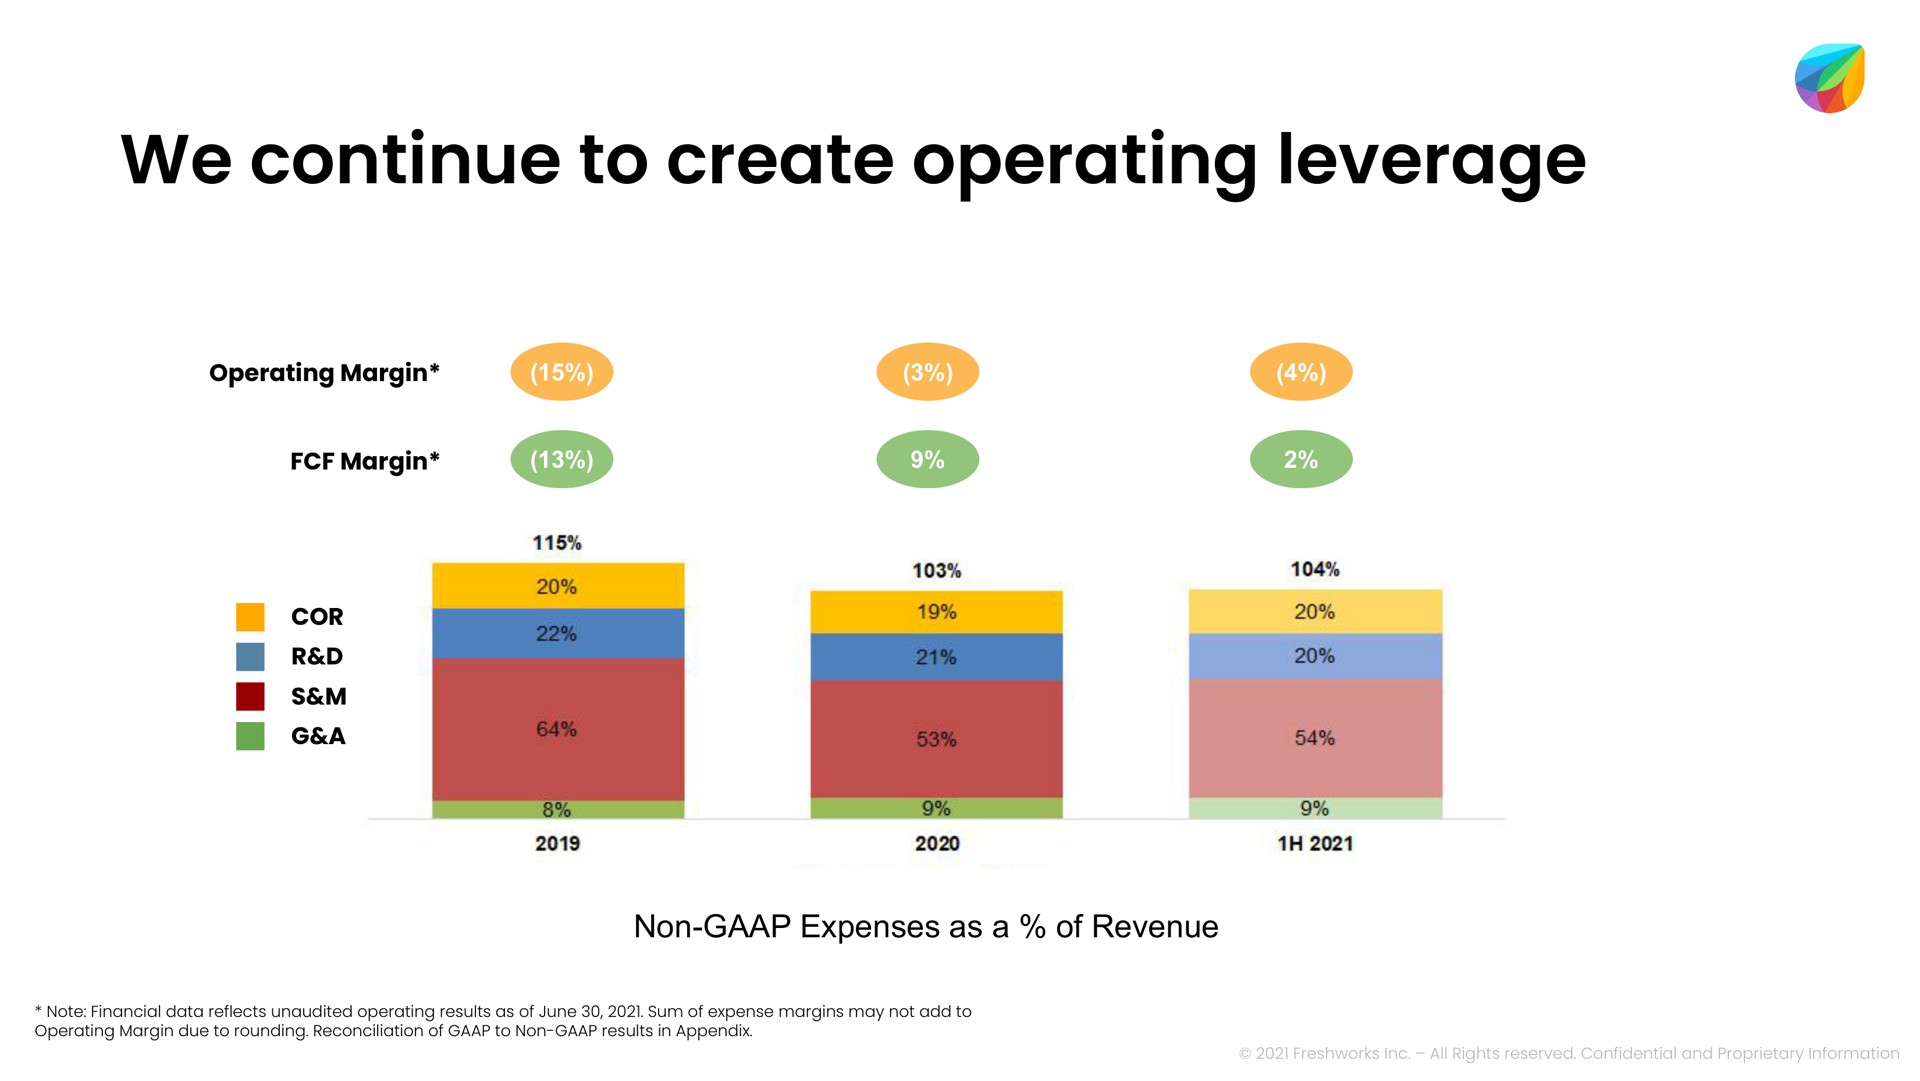 we continue to create operating leverage | Freshworks